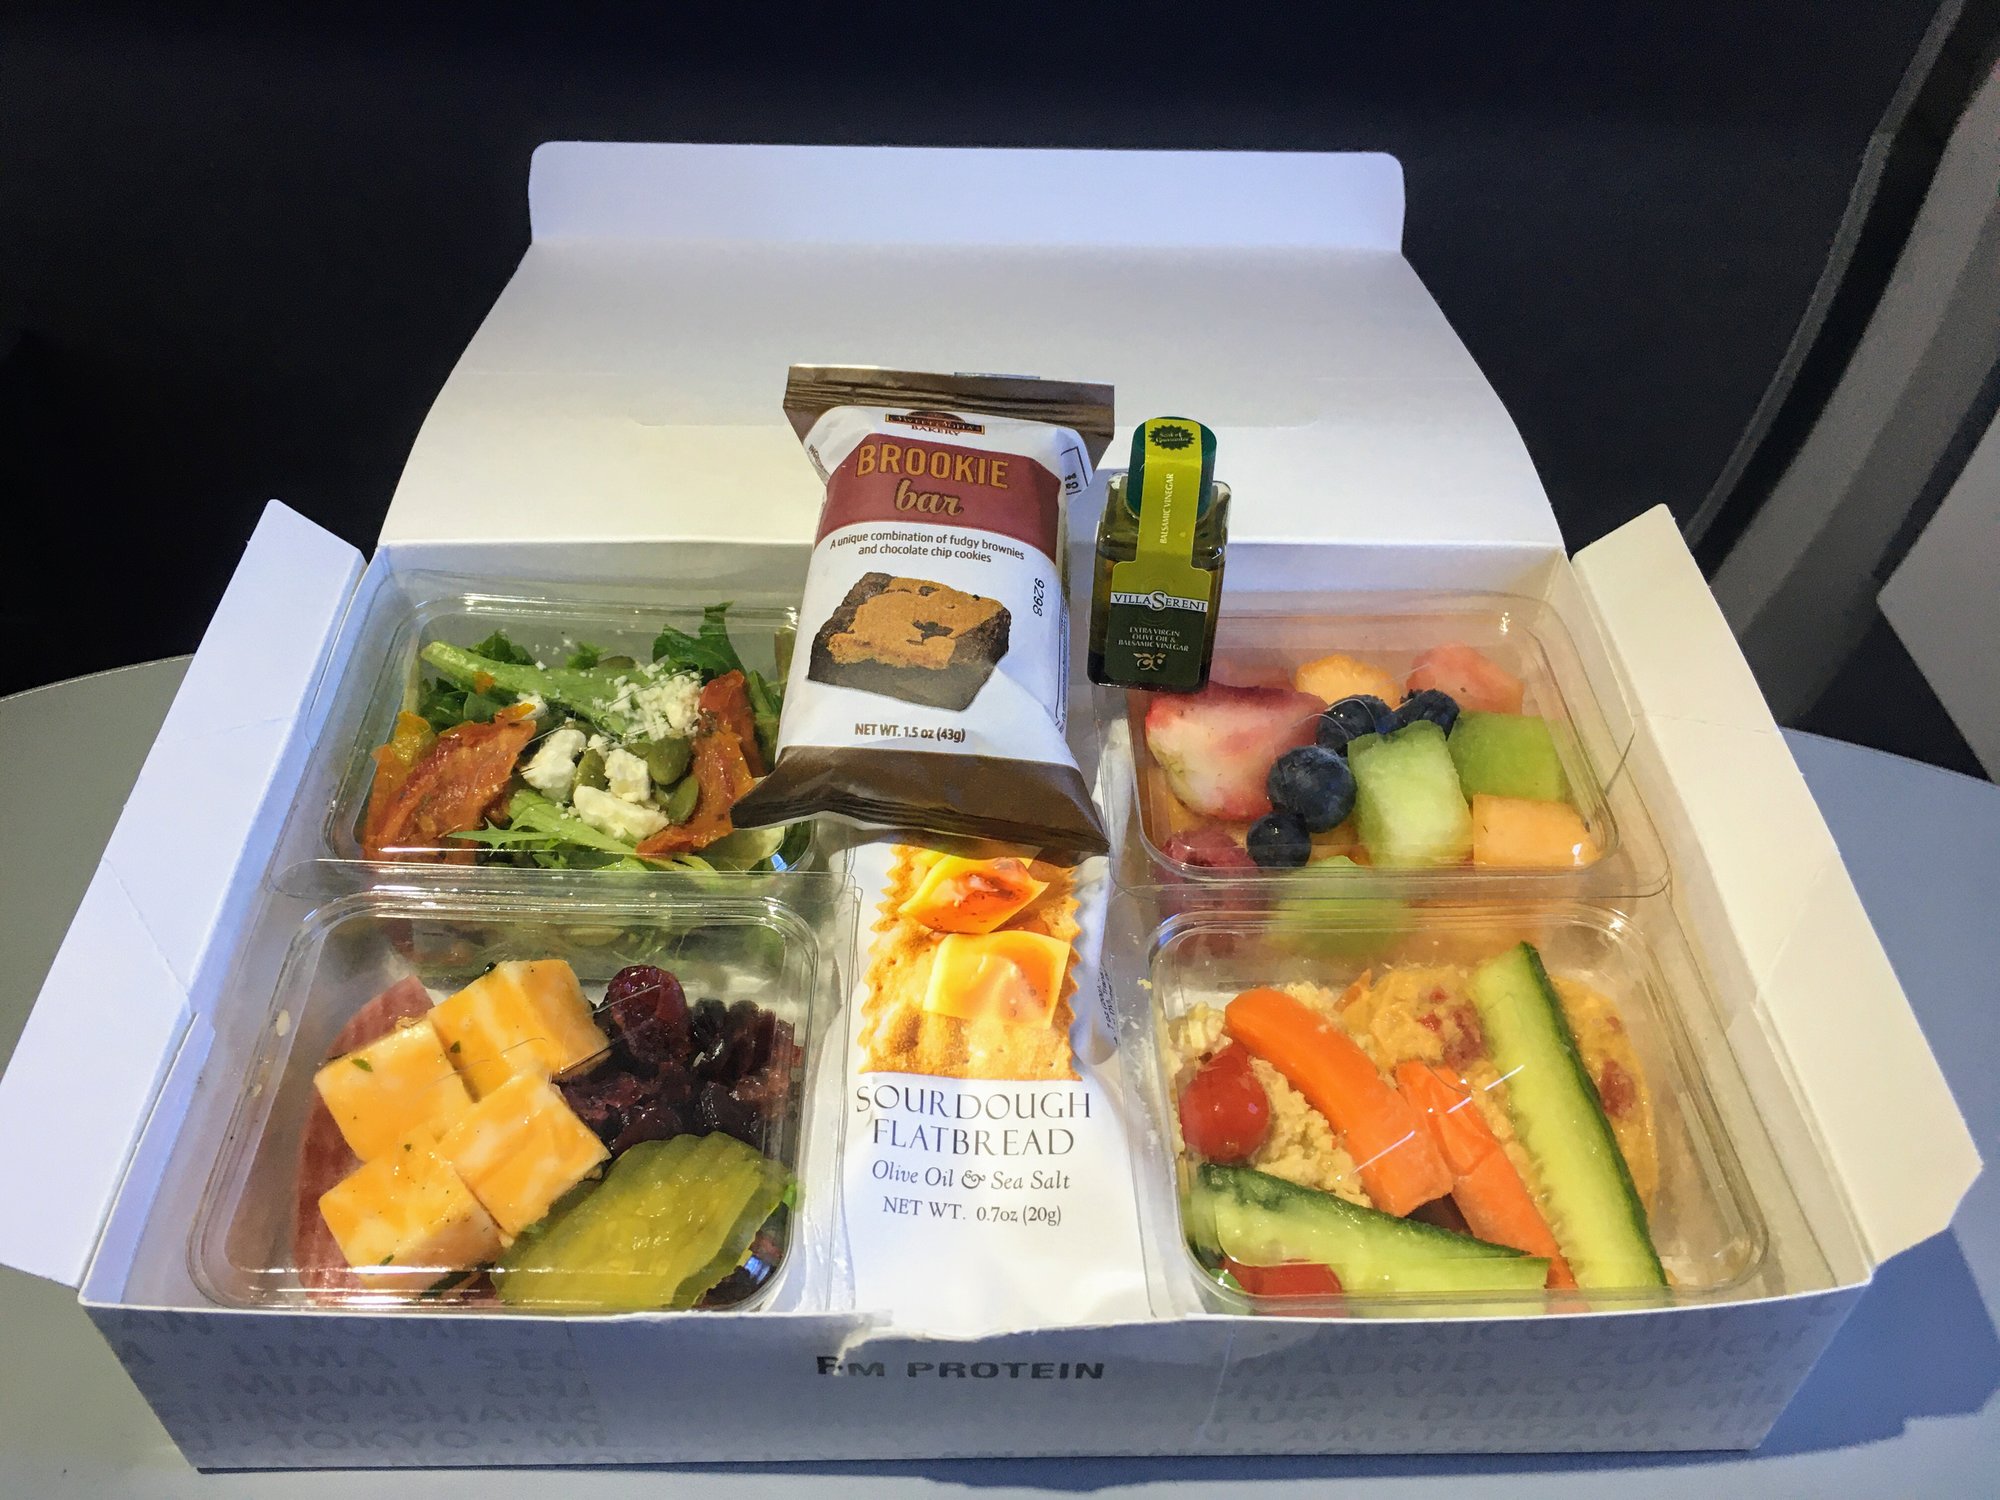 American Airlines To Start Feeding First Class Passengers On 900+ Mile Flights